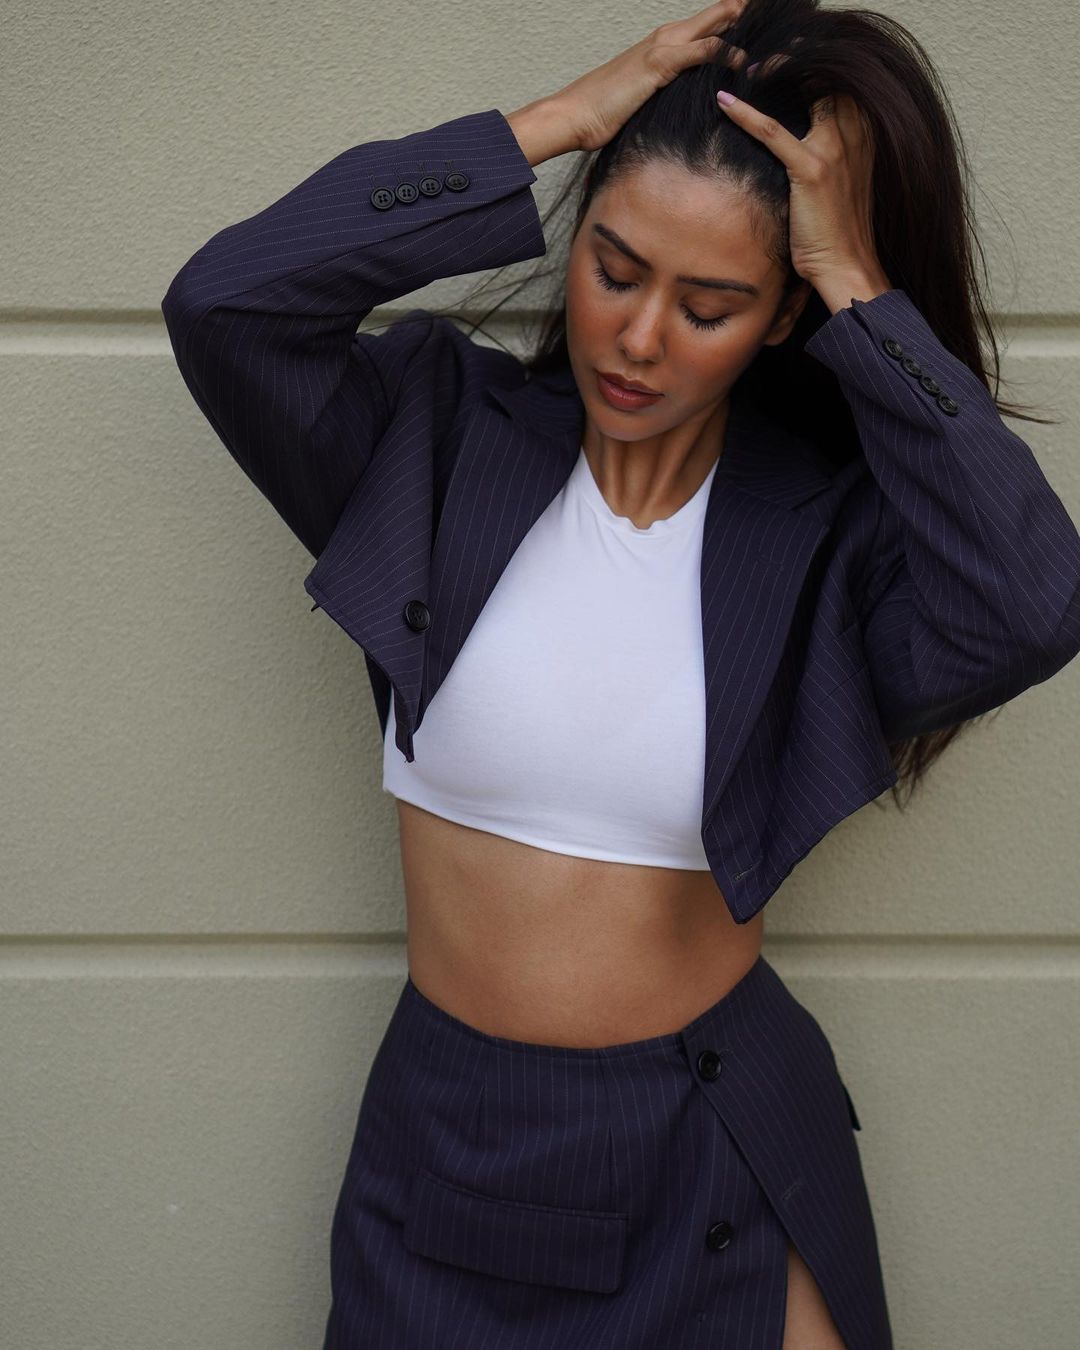 Sonam Bajwa flashes her legs in Beautiful Short Outfit during Photoshoot 7